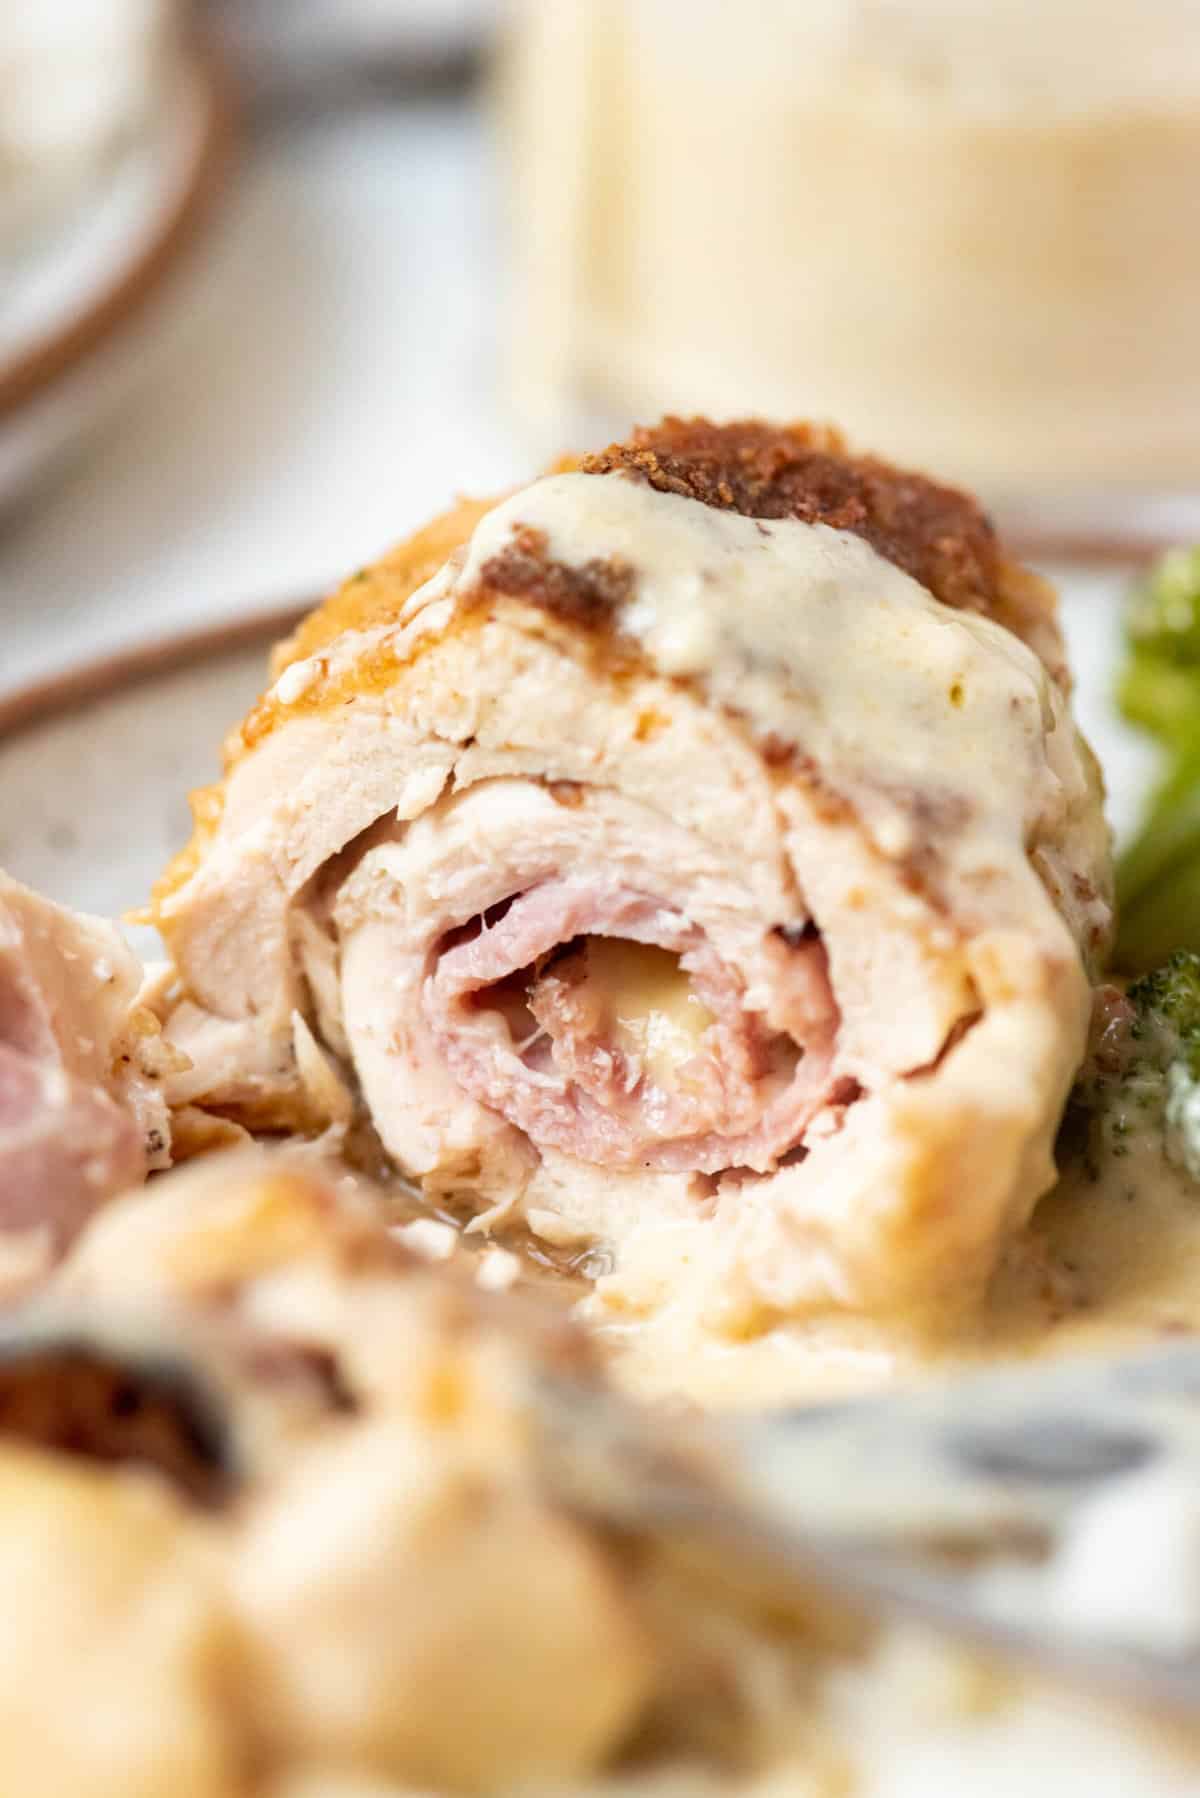 A piece of chicken cordon bleu that has been sliced in half to show the inside of ham and swiss cheese.